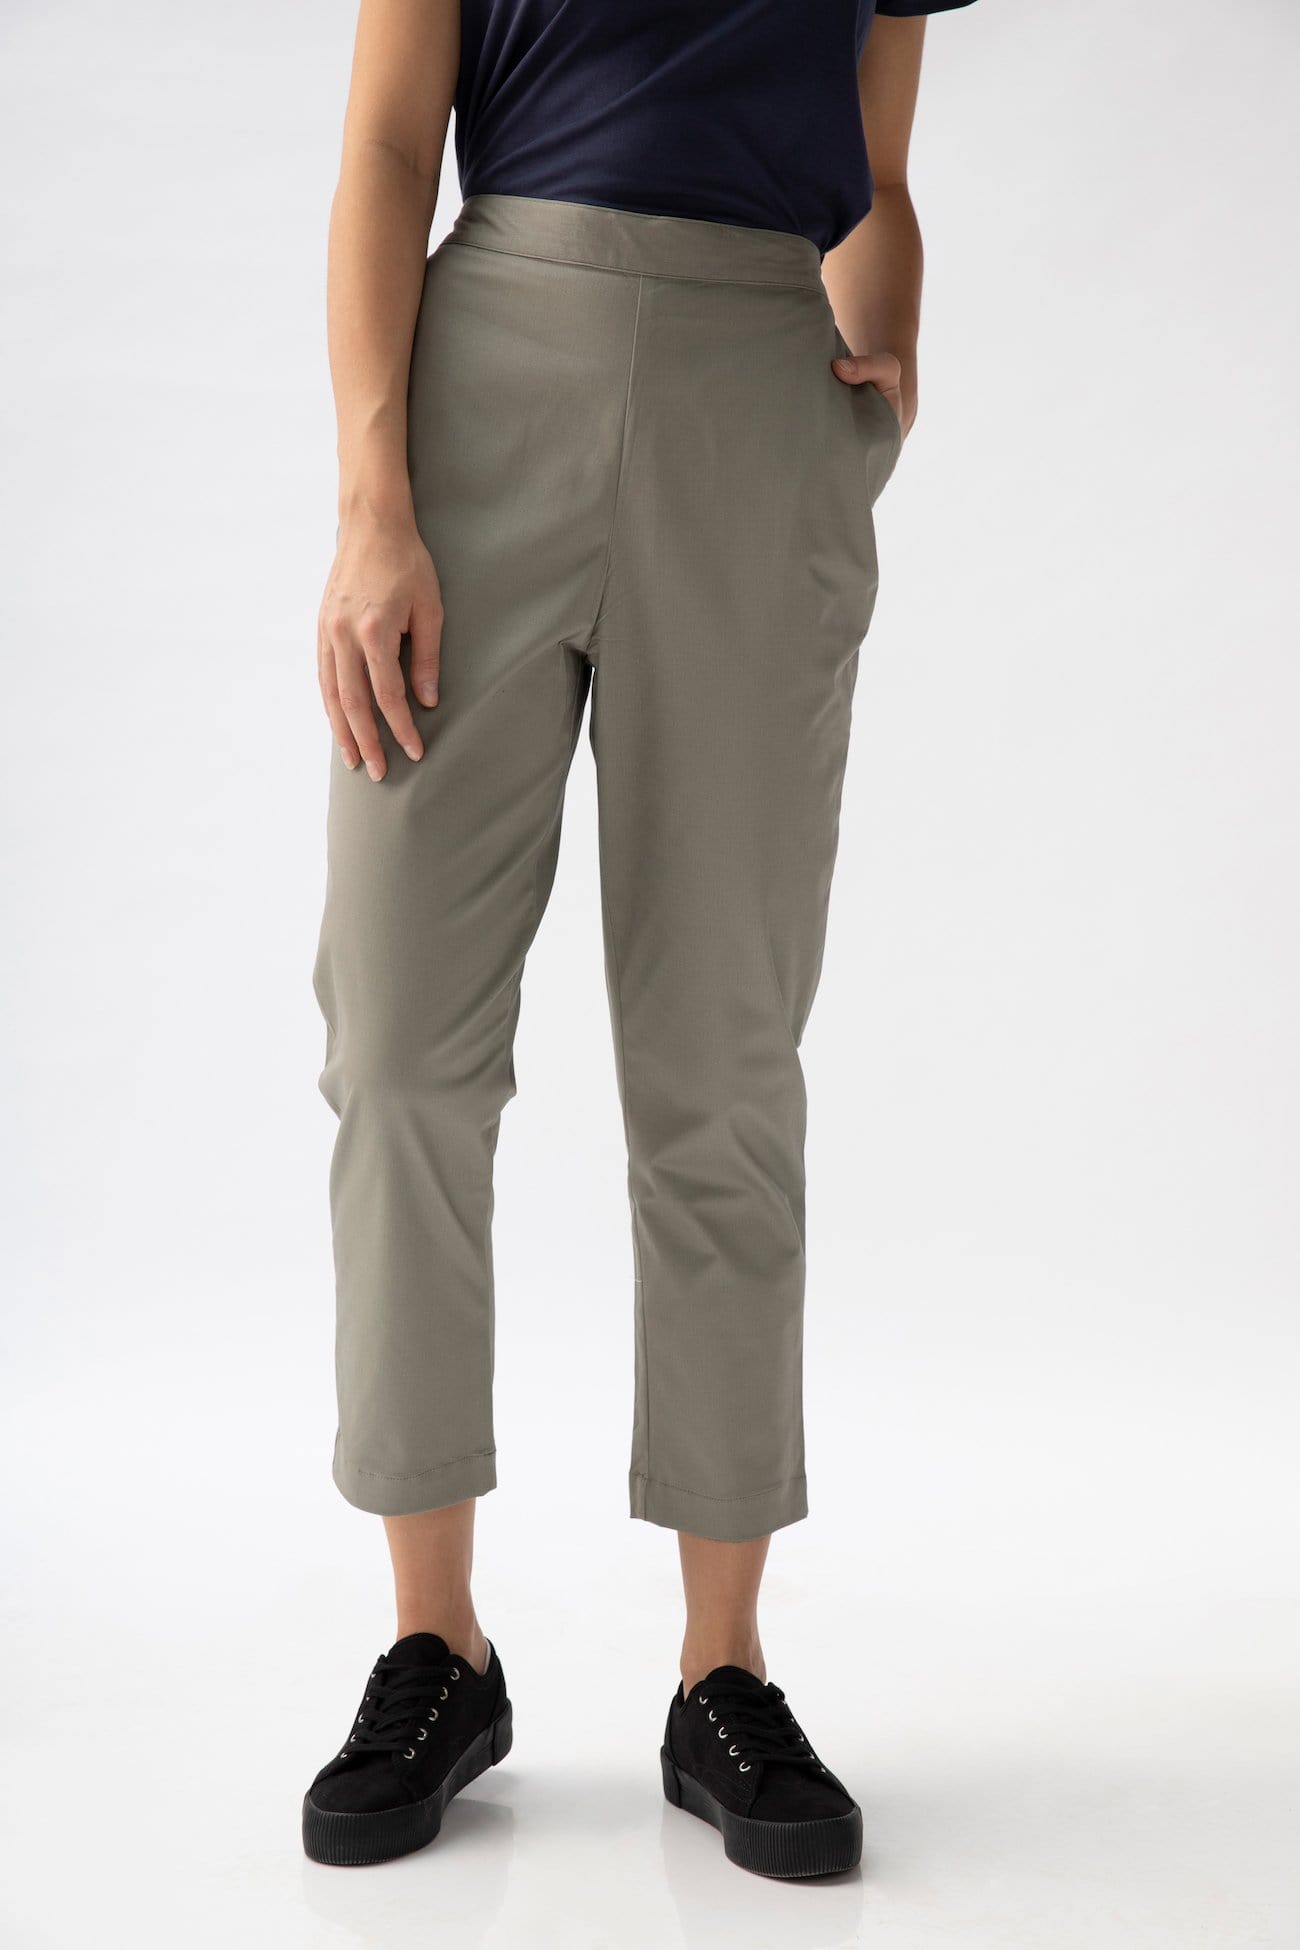 Saltpetre womens casual and formal wear pants, in khaki-grey, 100% organic cotton fabric, indo-western wear in ankle length pants and deep pockets